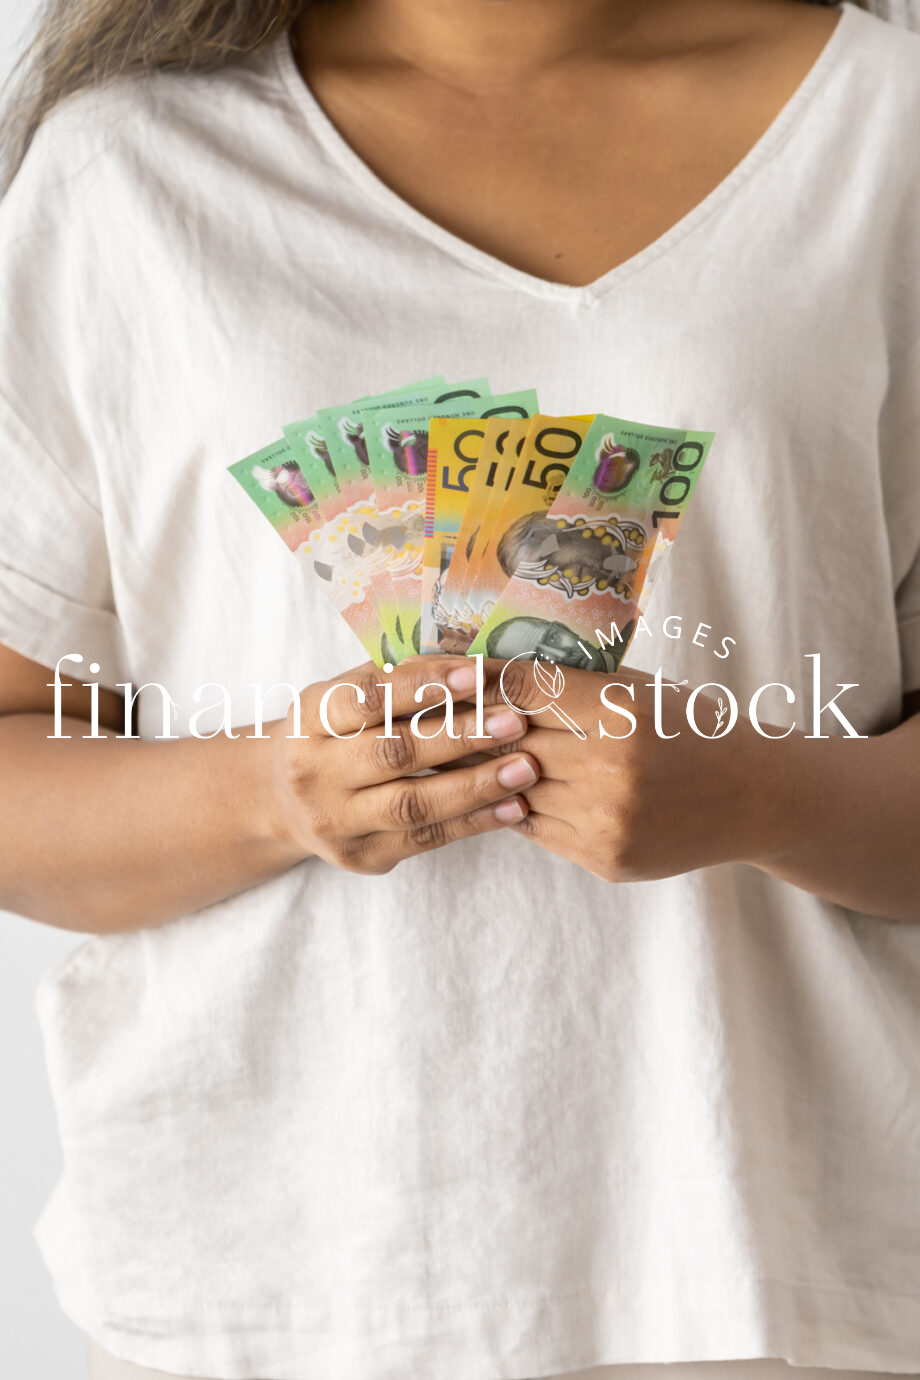 Financial Stock Images - Home finance, personal finance.urrency-coins-desktop.